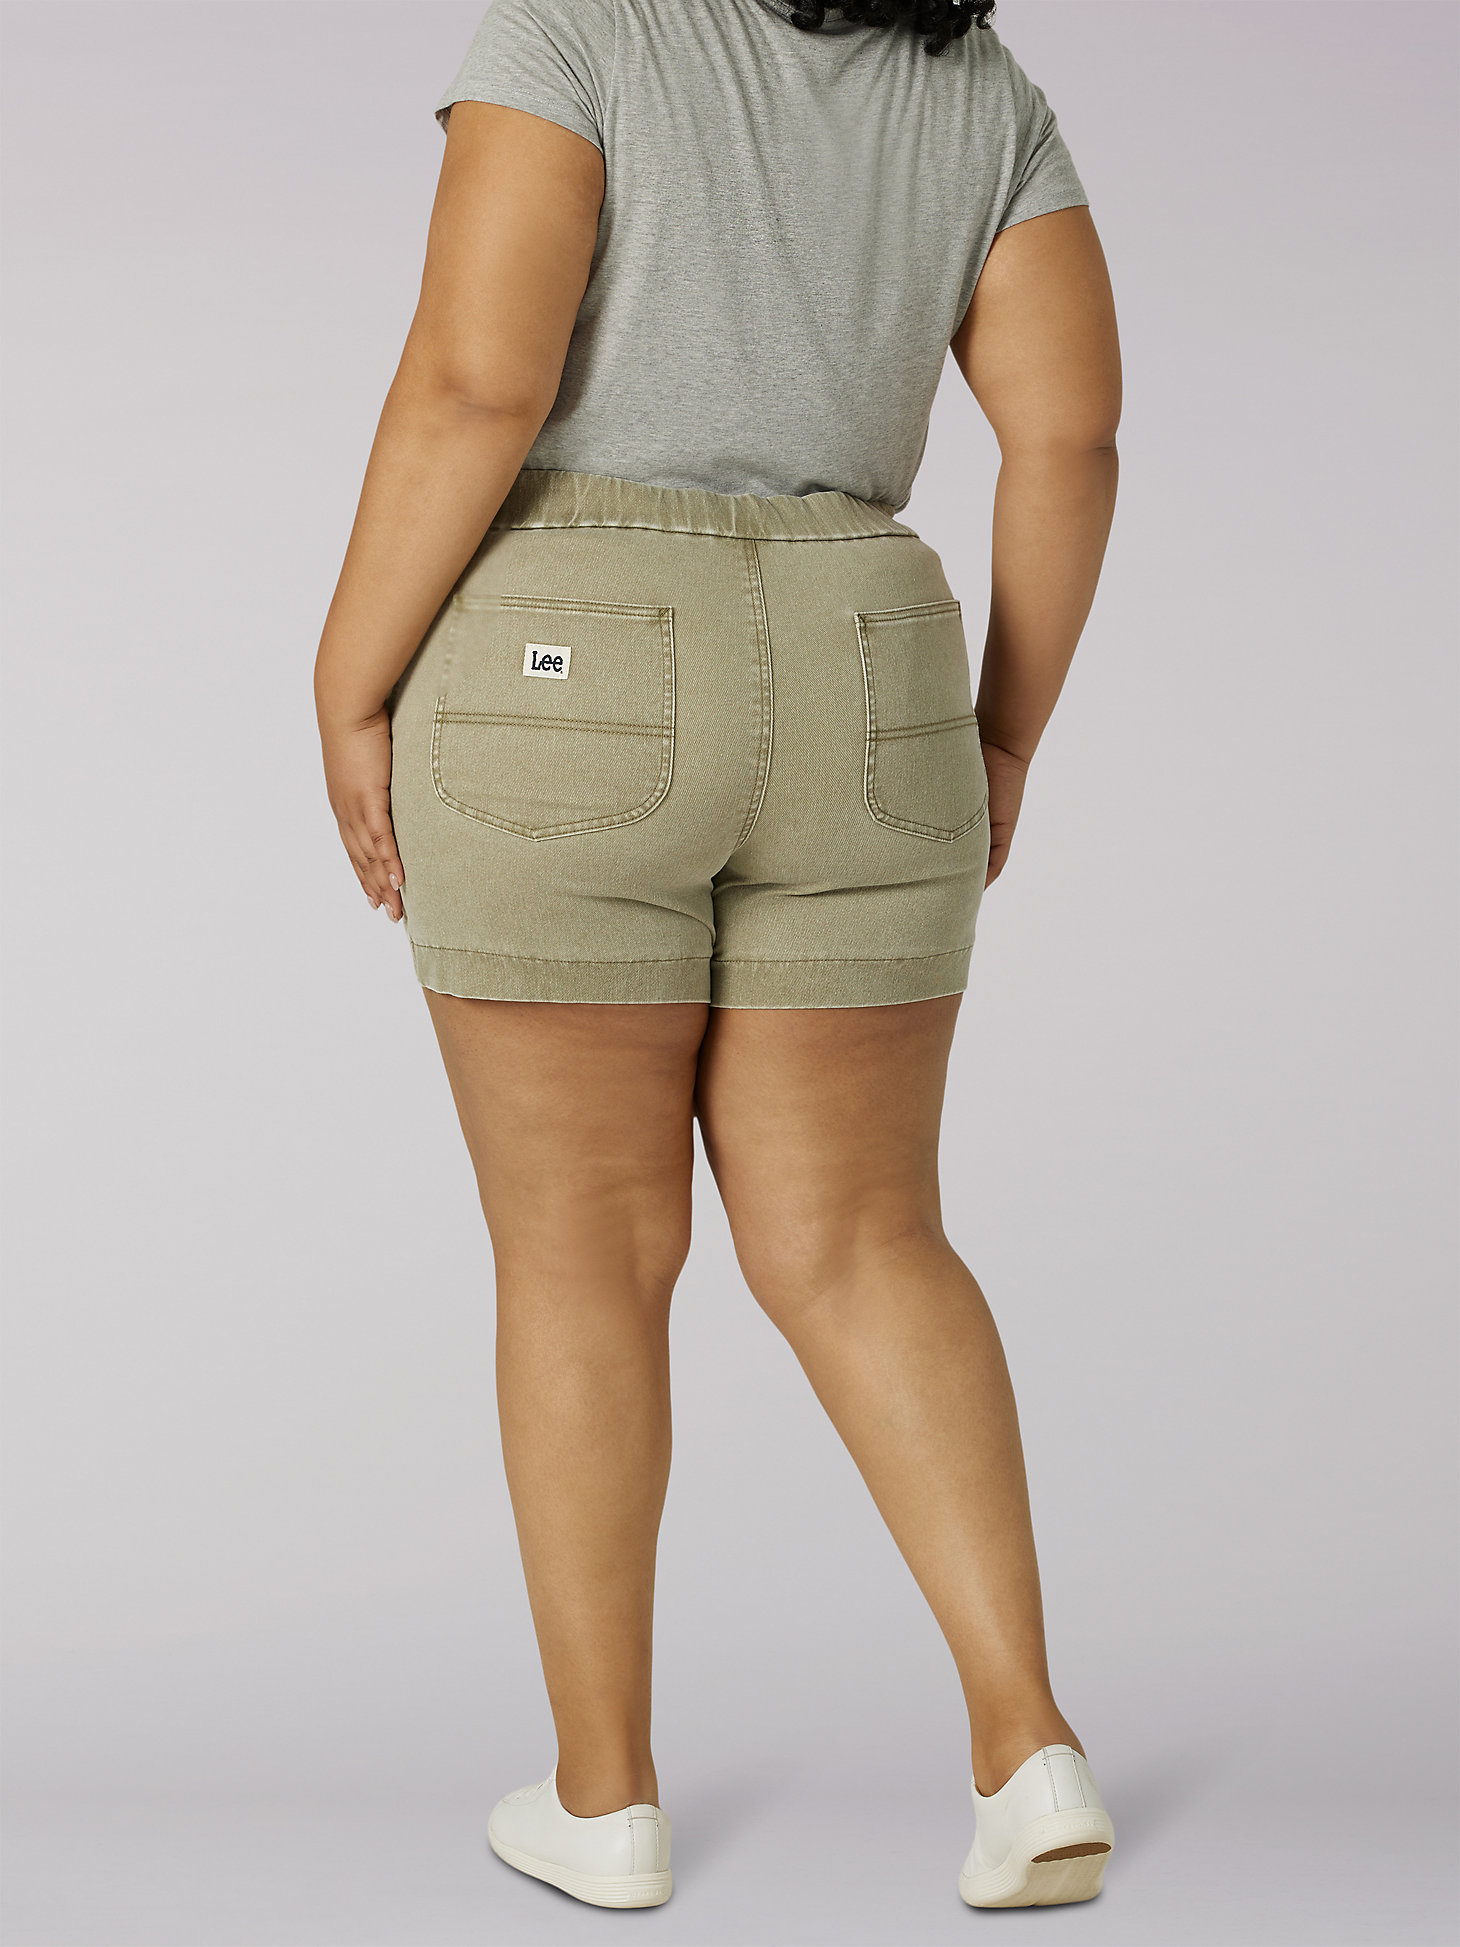 Women's Ultra Lux High Rise Pull-On Utility Short (Plus) in Brindle alternative view 3